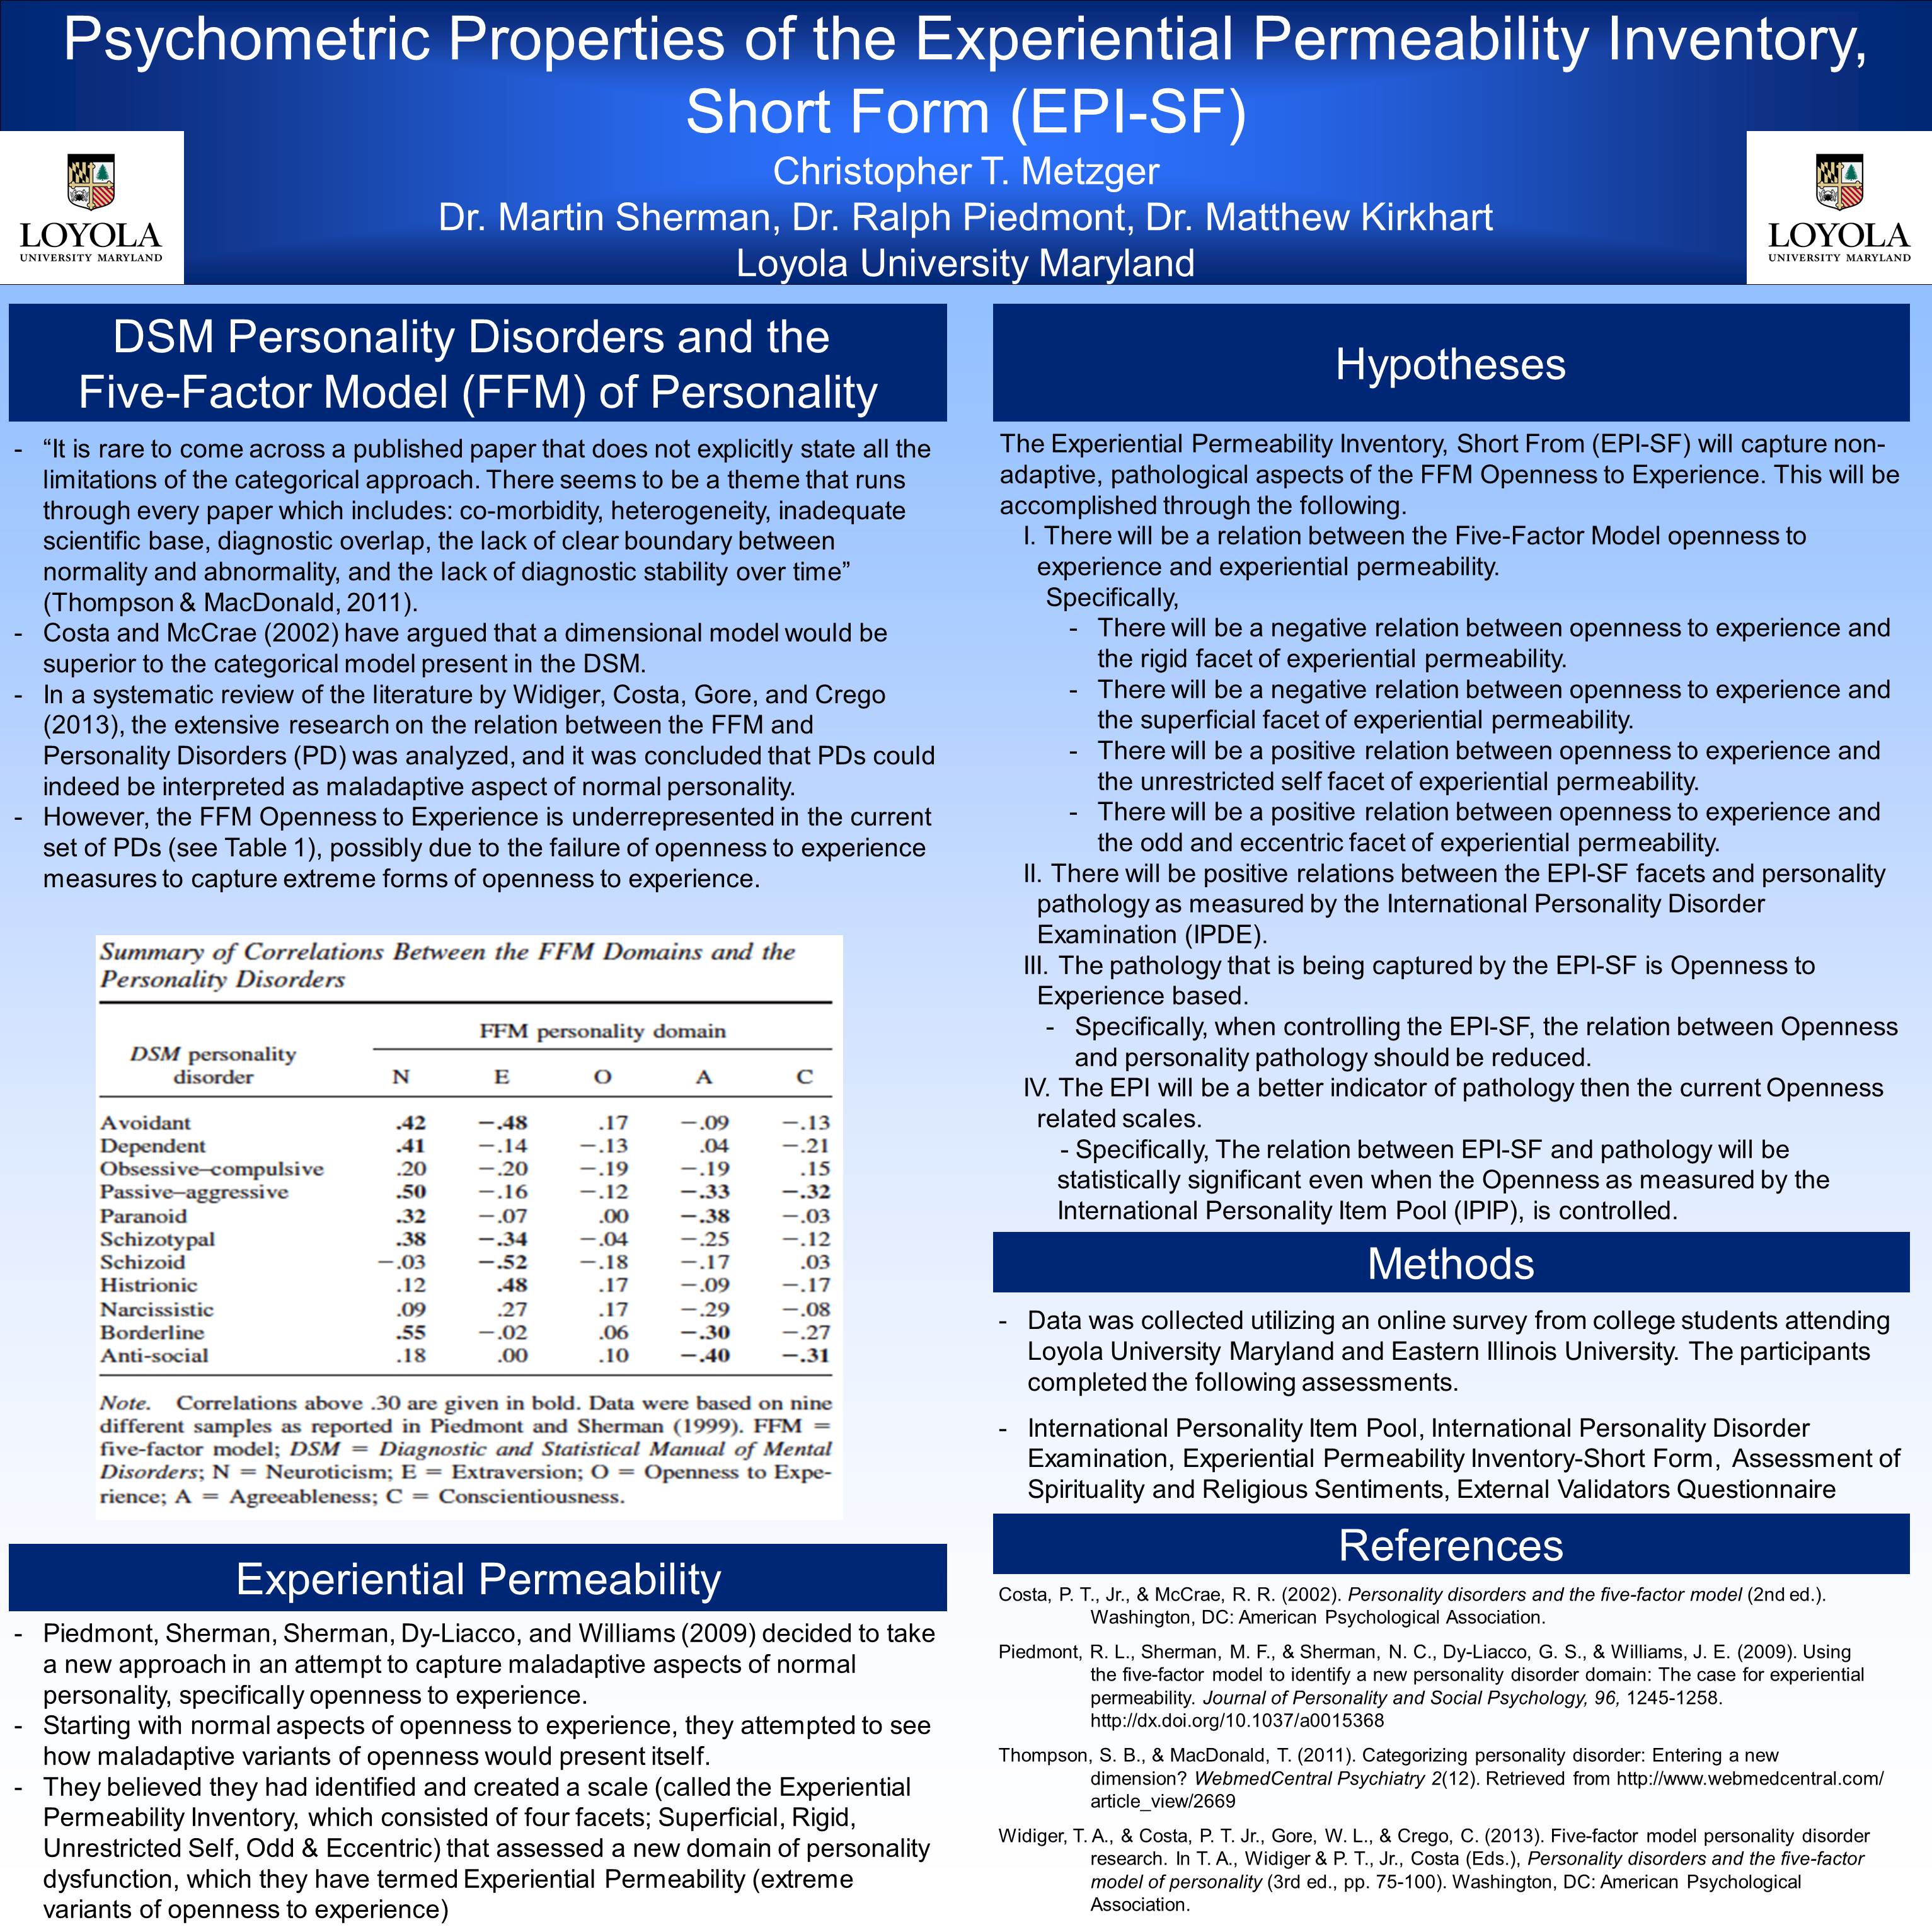 poster image: 'Psychometric Properties of the Experimental Permeability Inventory Short Form'